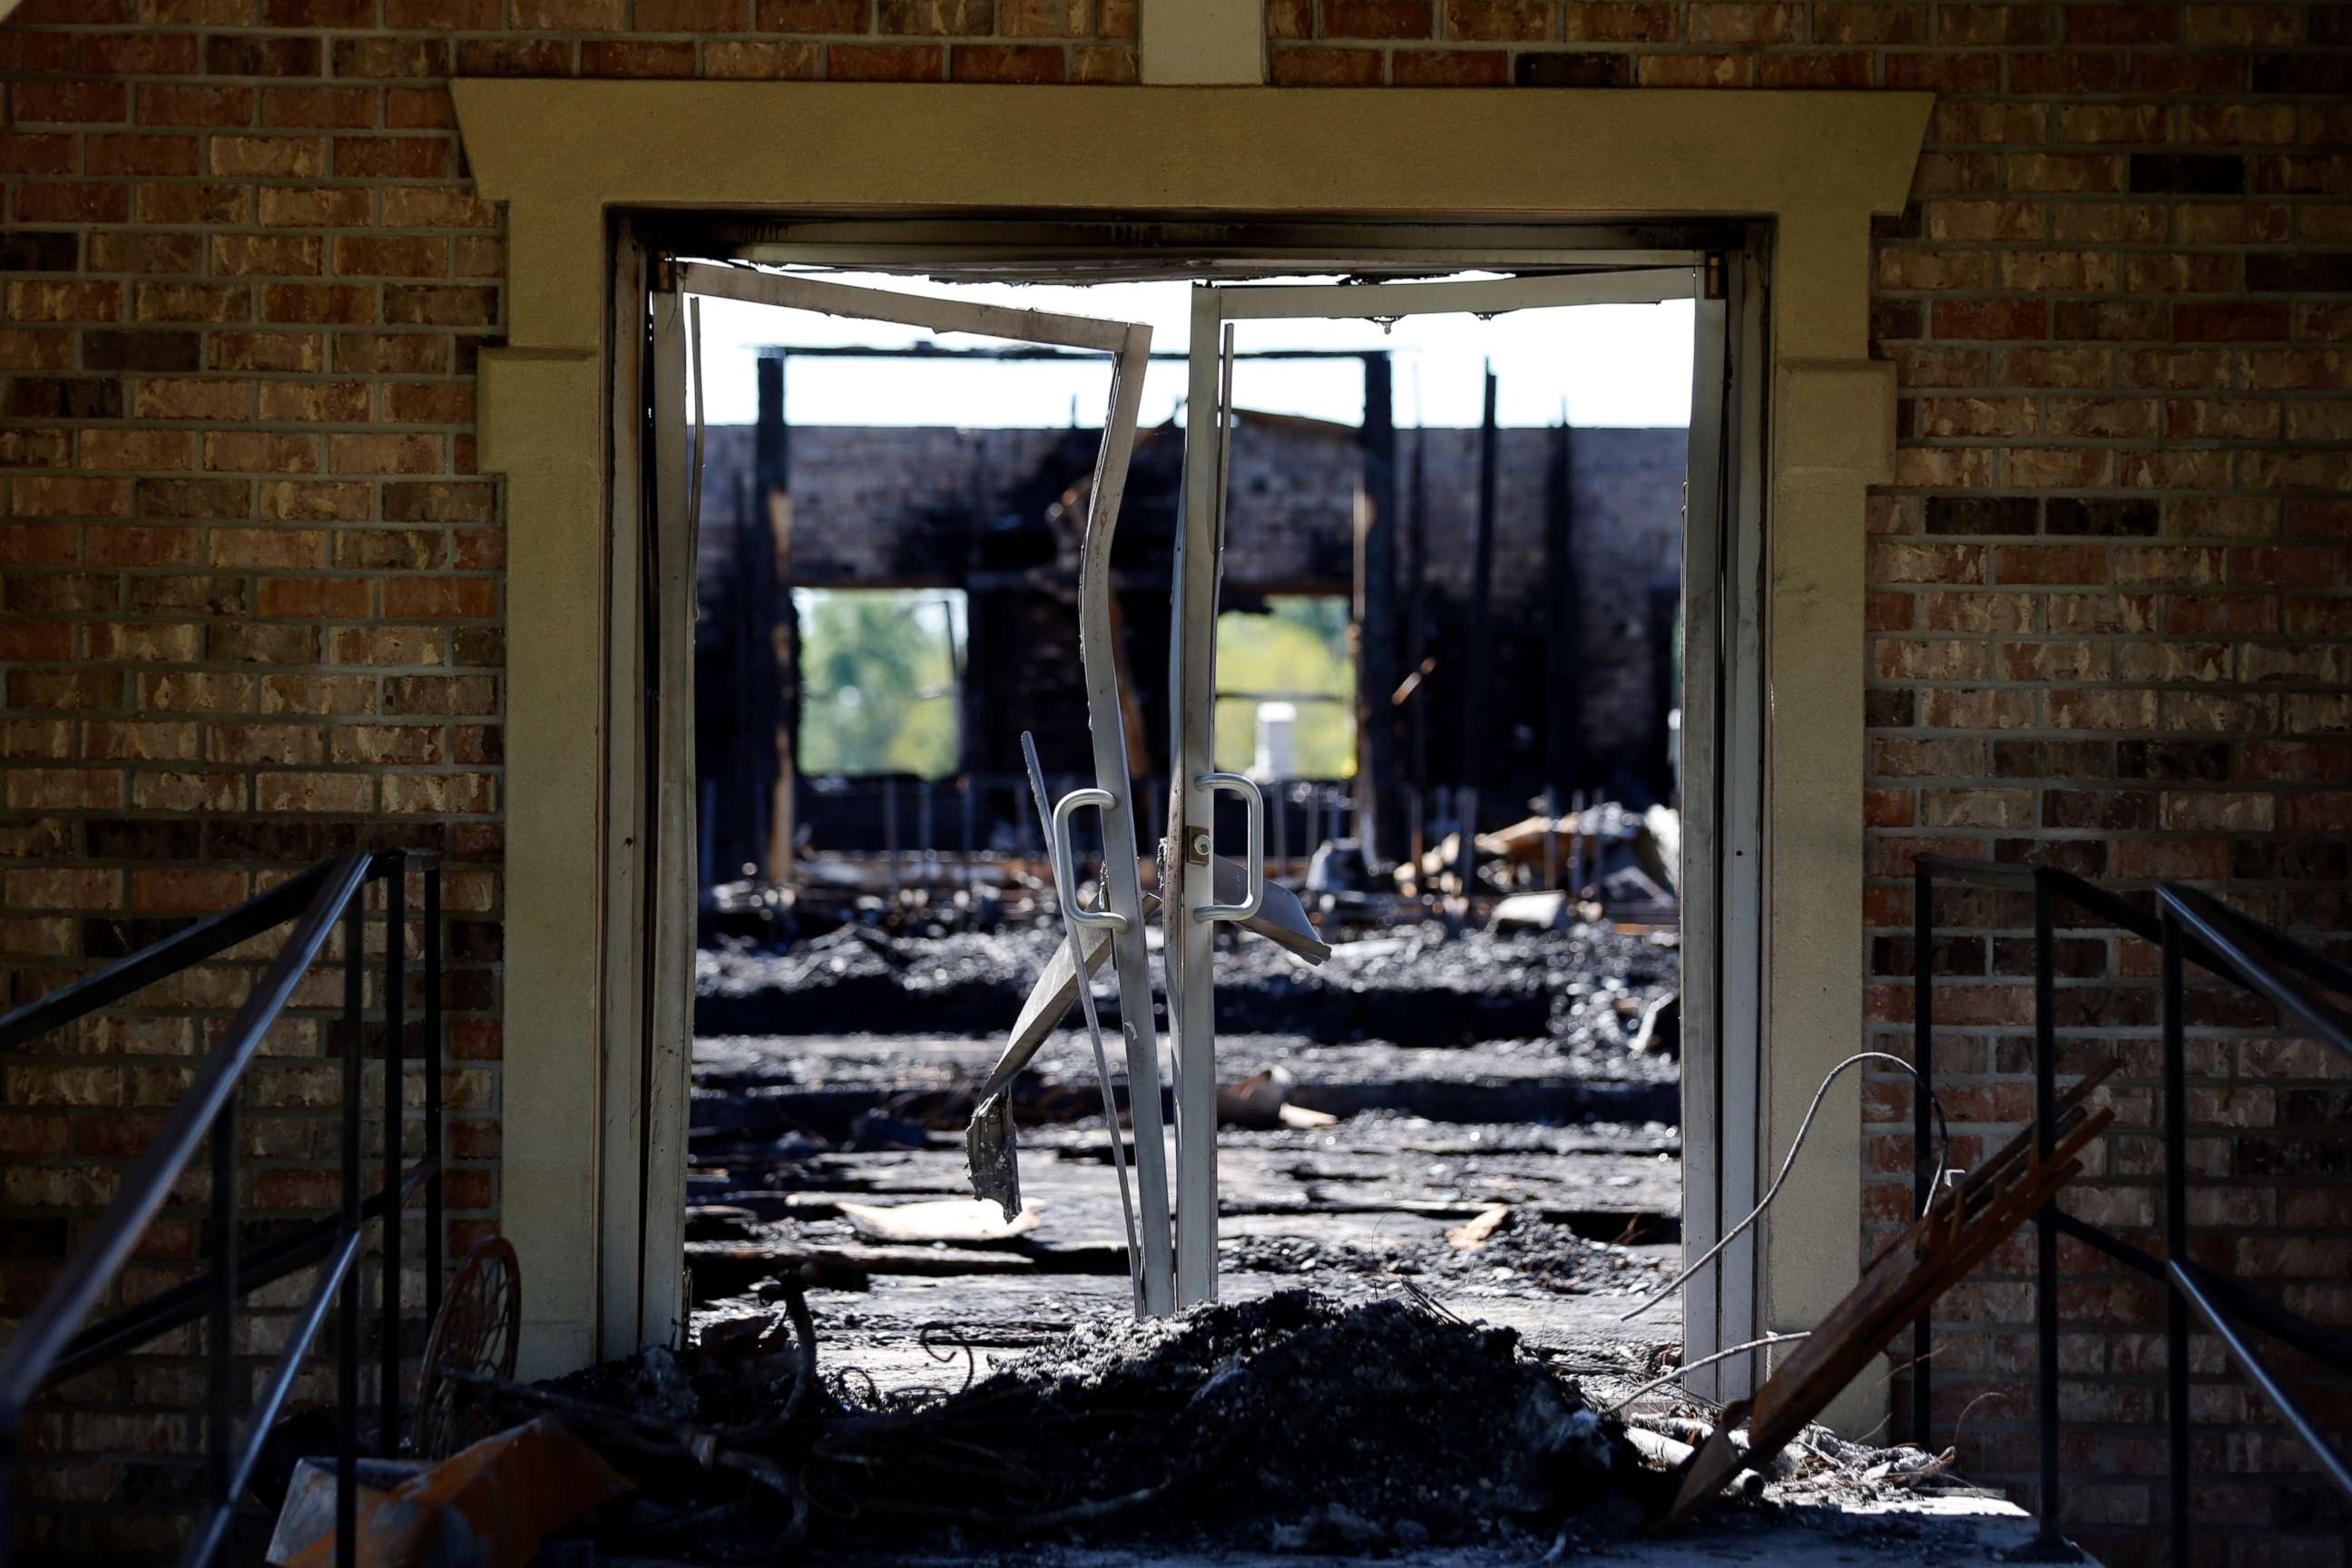 PHOTO: The burnt ruins of the Greater Union Baptist Church, one of three that recently burned down in St. Landry Parish, are seen in Opelousas, La., Wednesday, April 10, 2019.